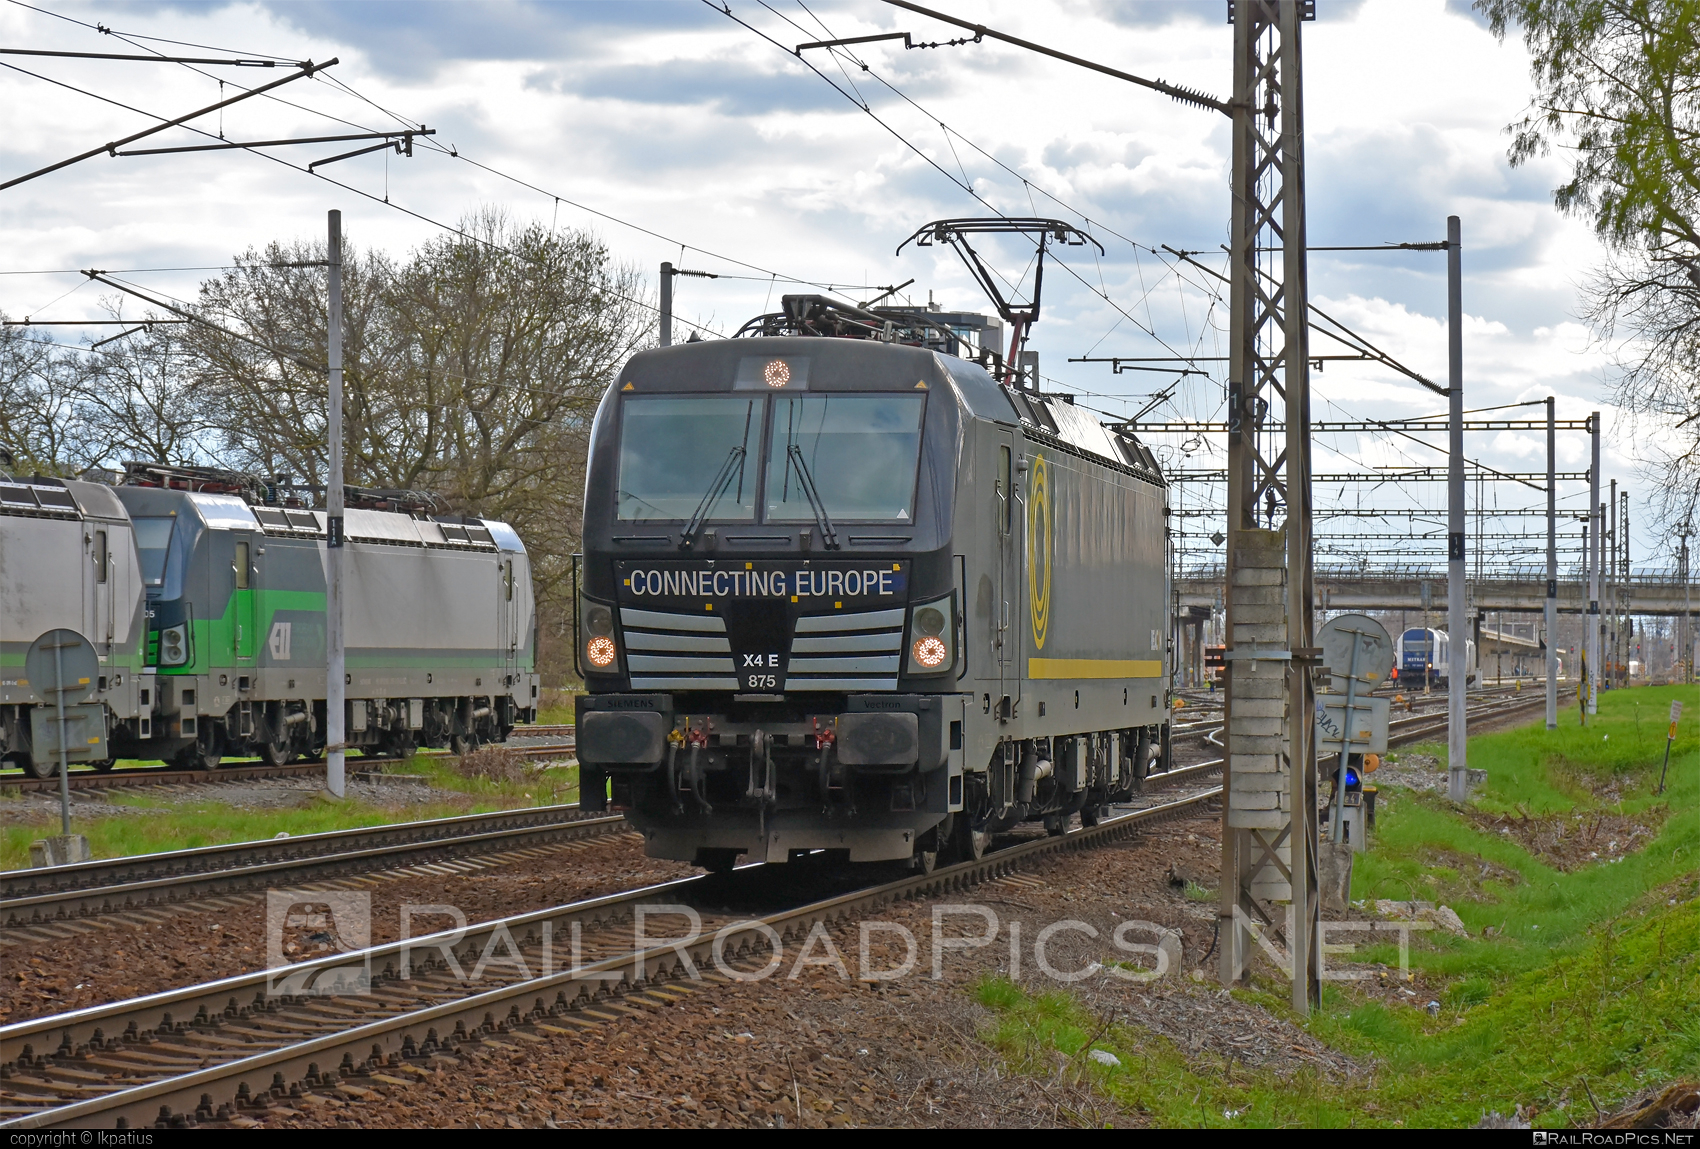 Siemens Vectron AC - 193 875 operated by ecco-rail GmbH #beaconrailleasing #beaconrailleasinglimited #brll #eccorail #eccorailgmbh #siemens #siemensVectron #siemensVectronAC #vectron #vectronAC